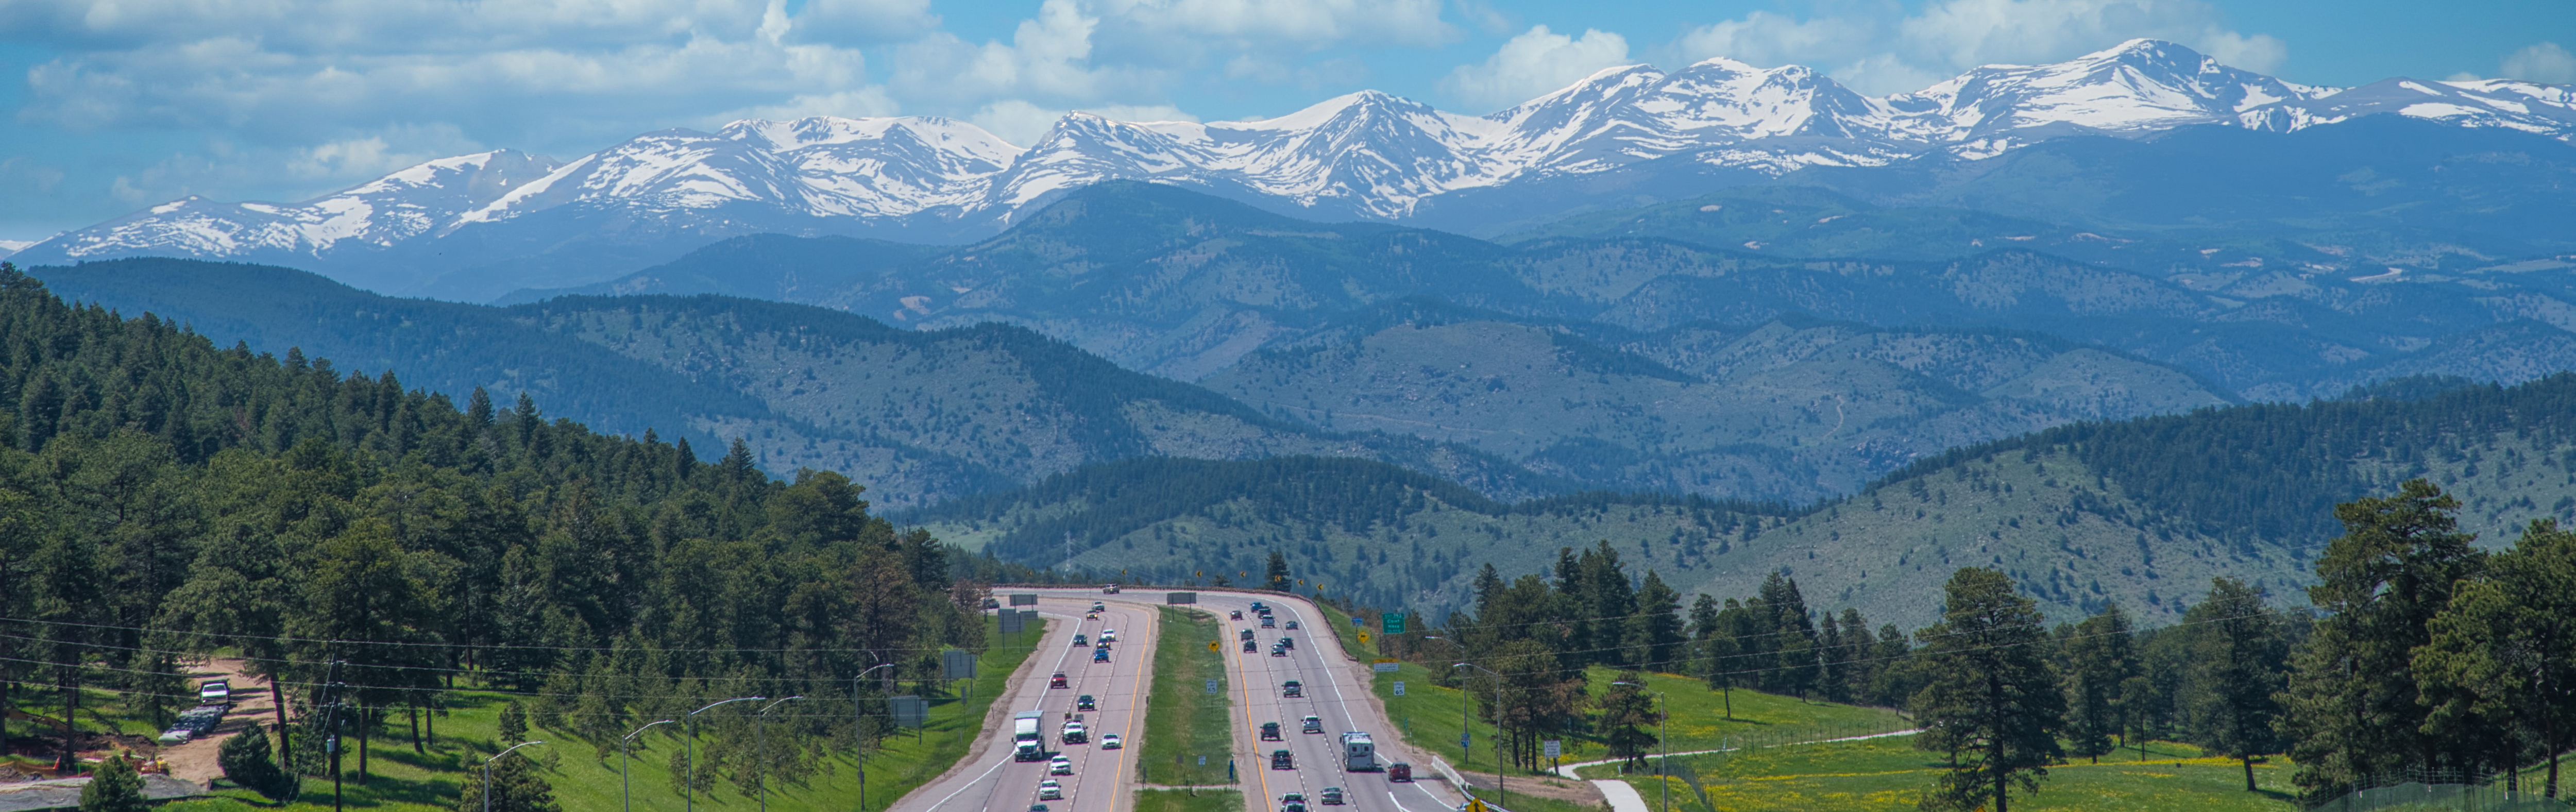 All about the Floyd Hill Project on I-70 in Colorado | Breckenridge Associates Real Estate